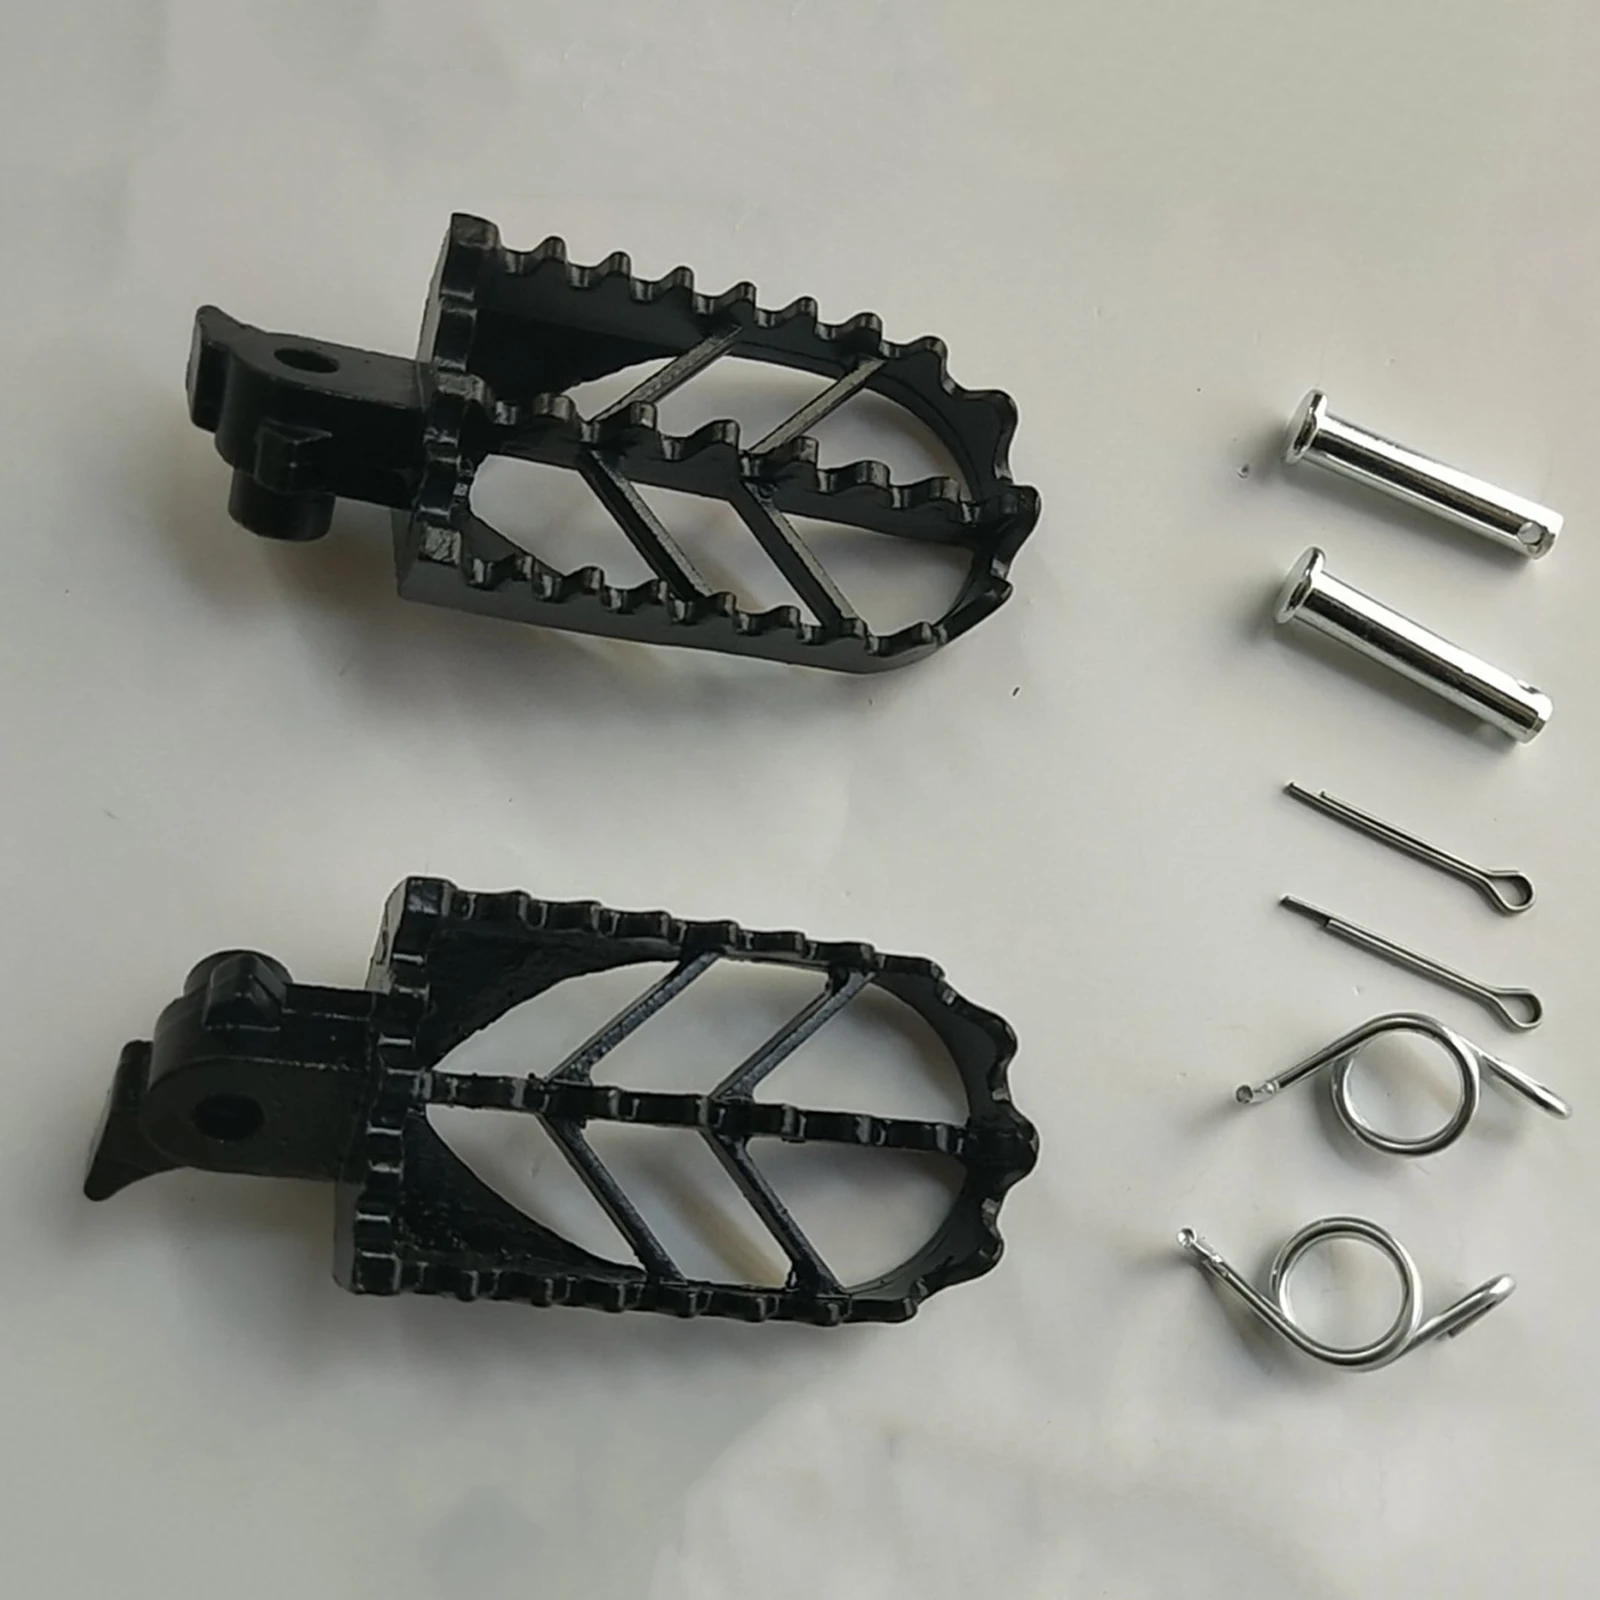 Stainless Steel Footrest Foot Pegs Footpegs for Honda CRF50 CRF70 CRF100F for Yamaha PW50 PW80 Motocross